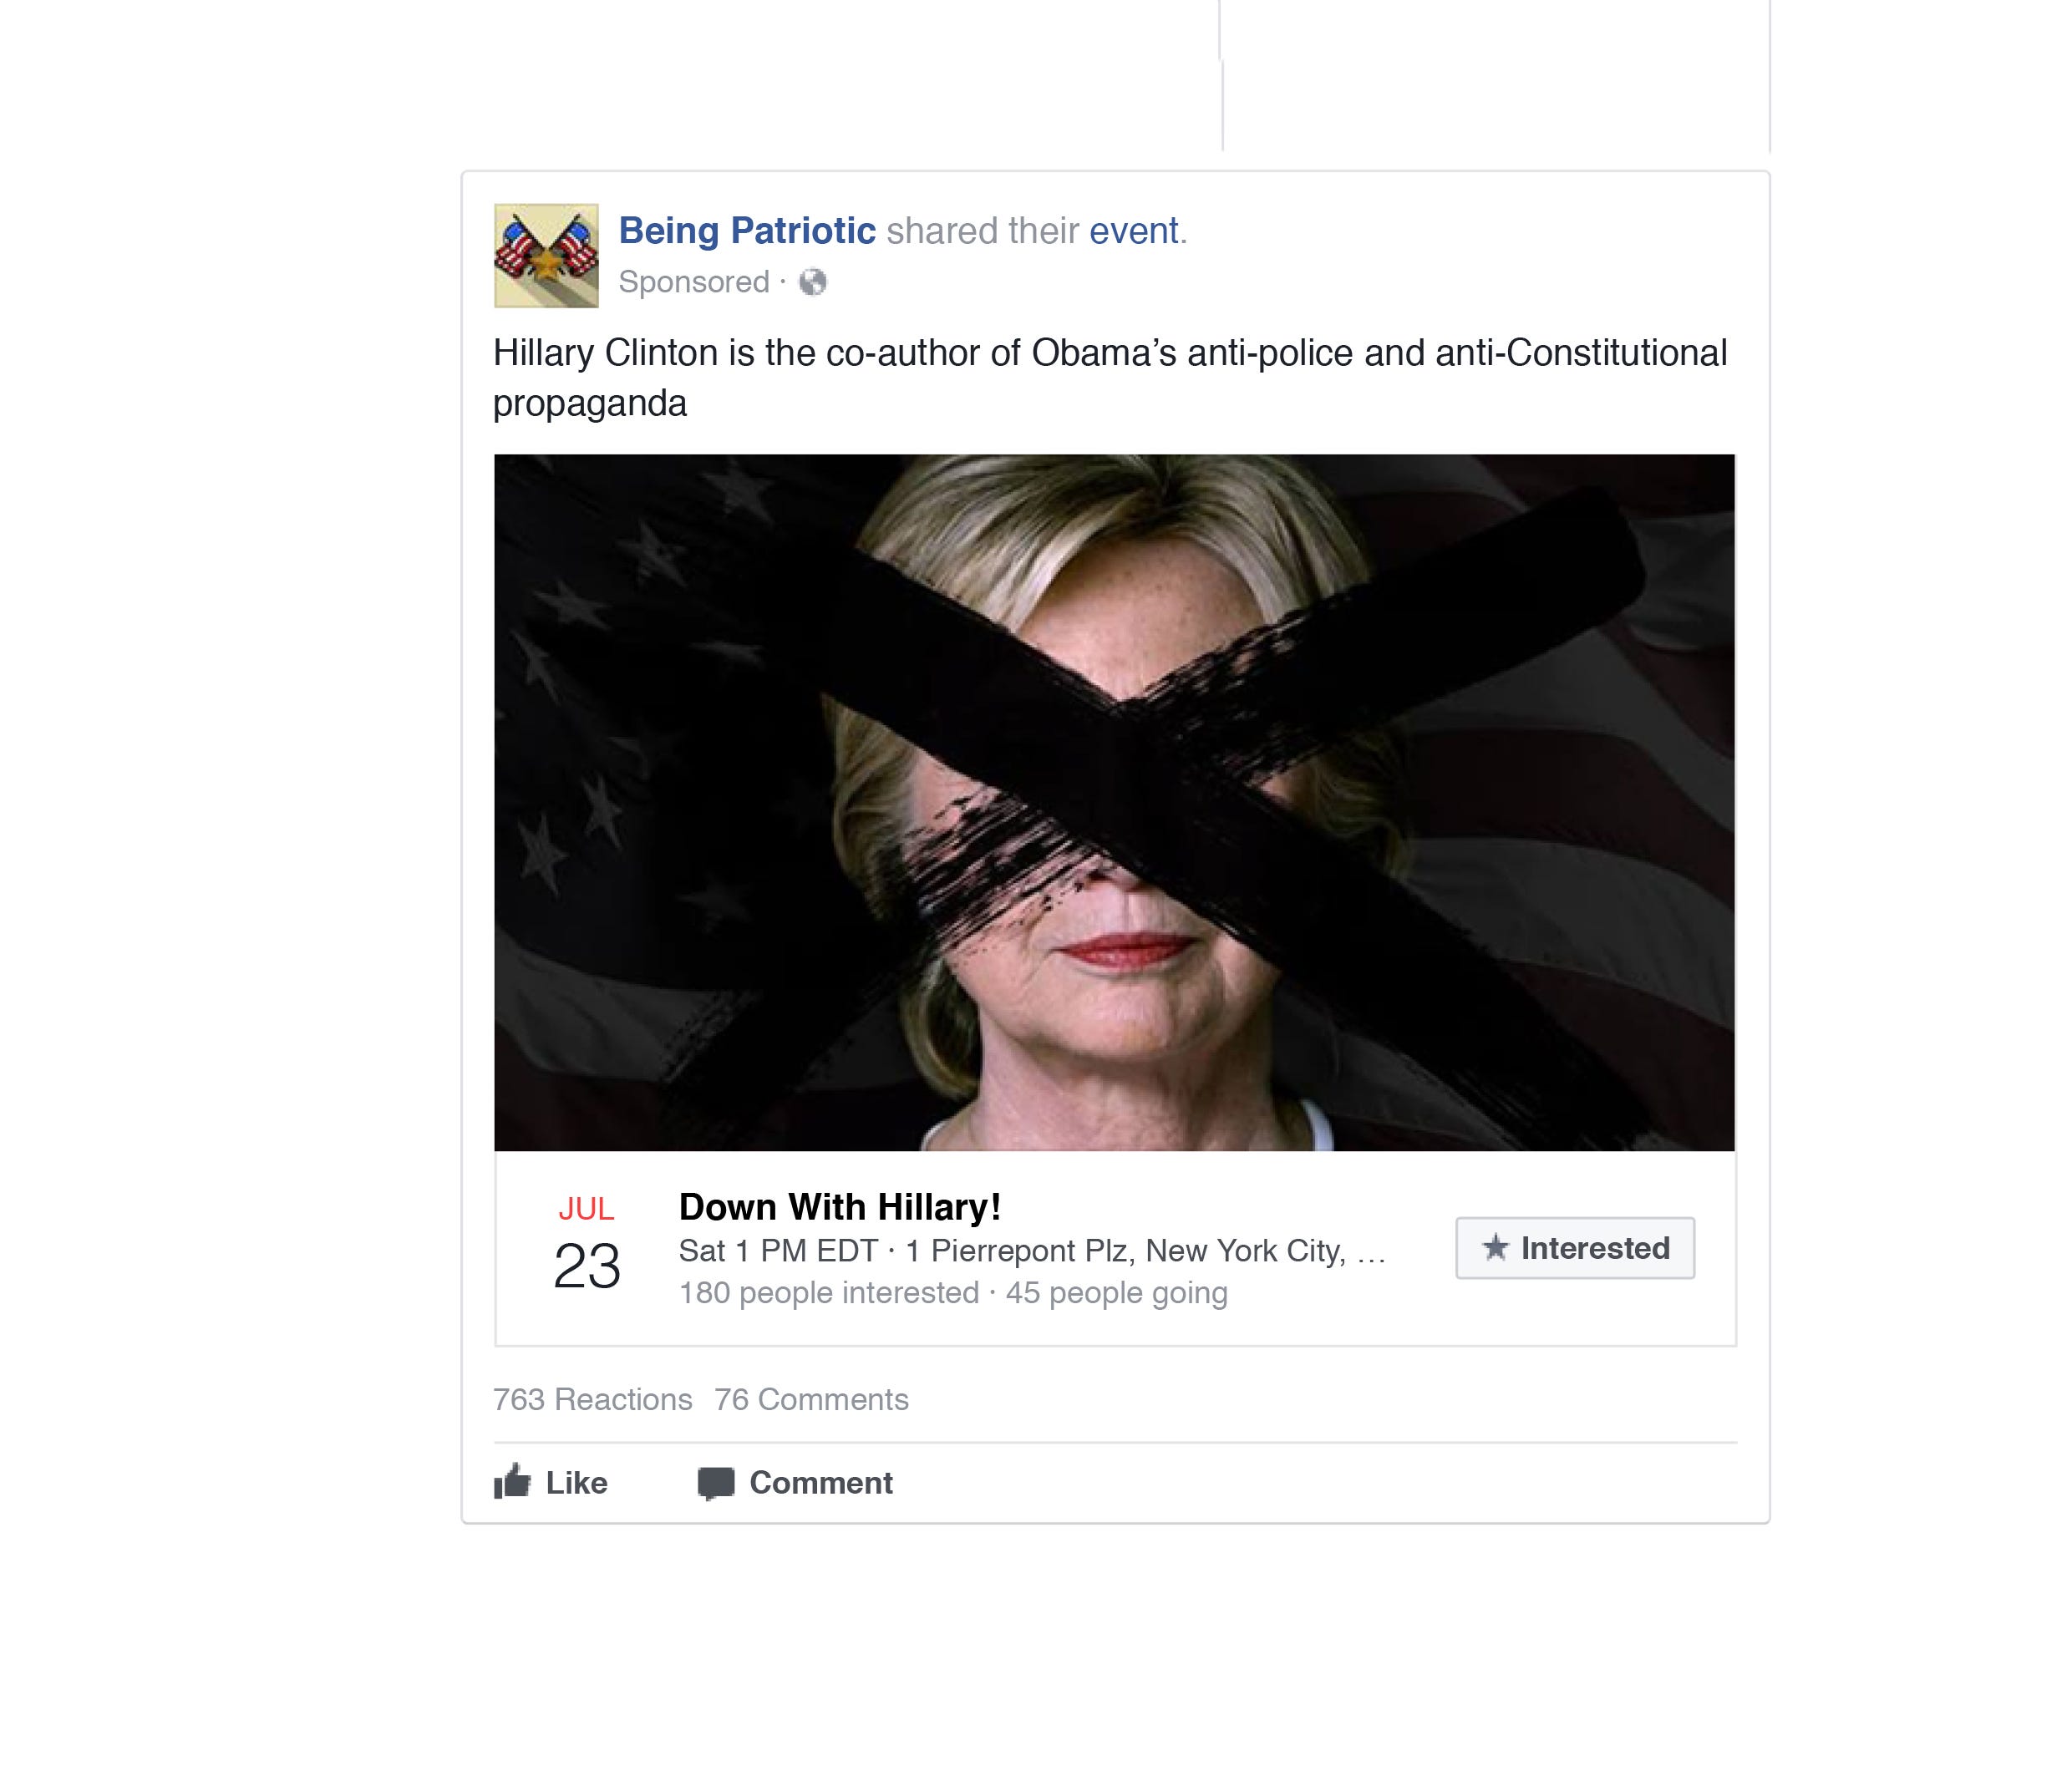 This is one of the Russian Facebook ads intended to stir dissension in the U.S.        